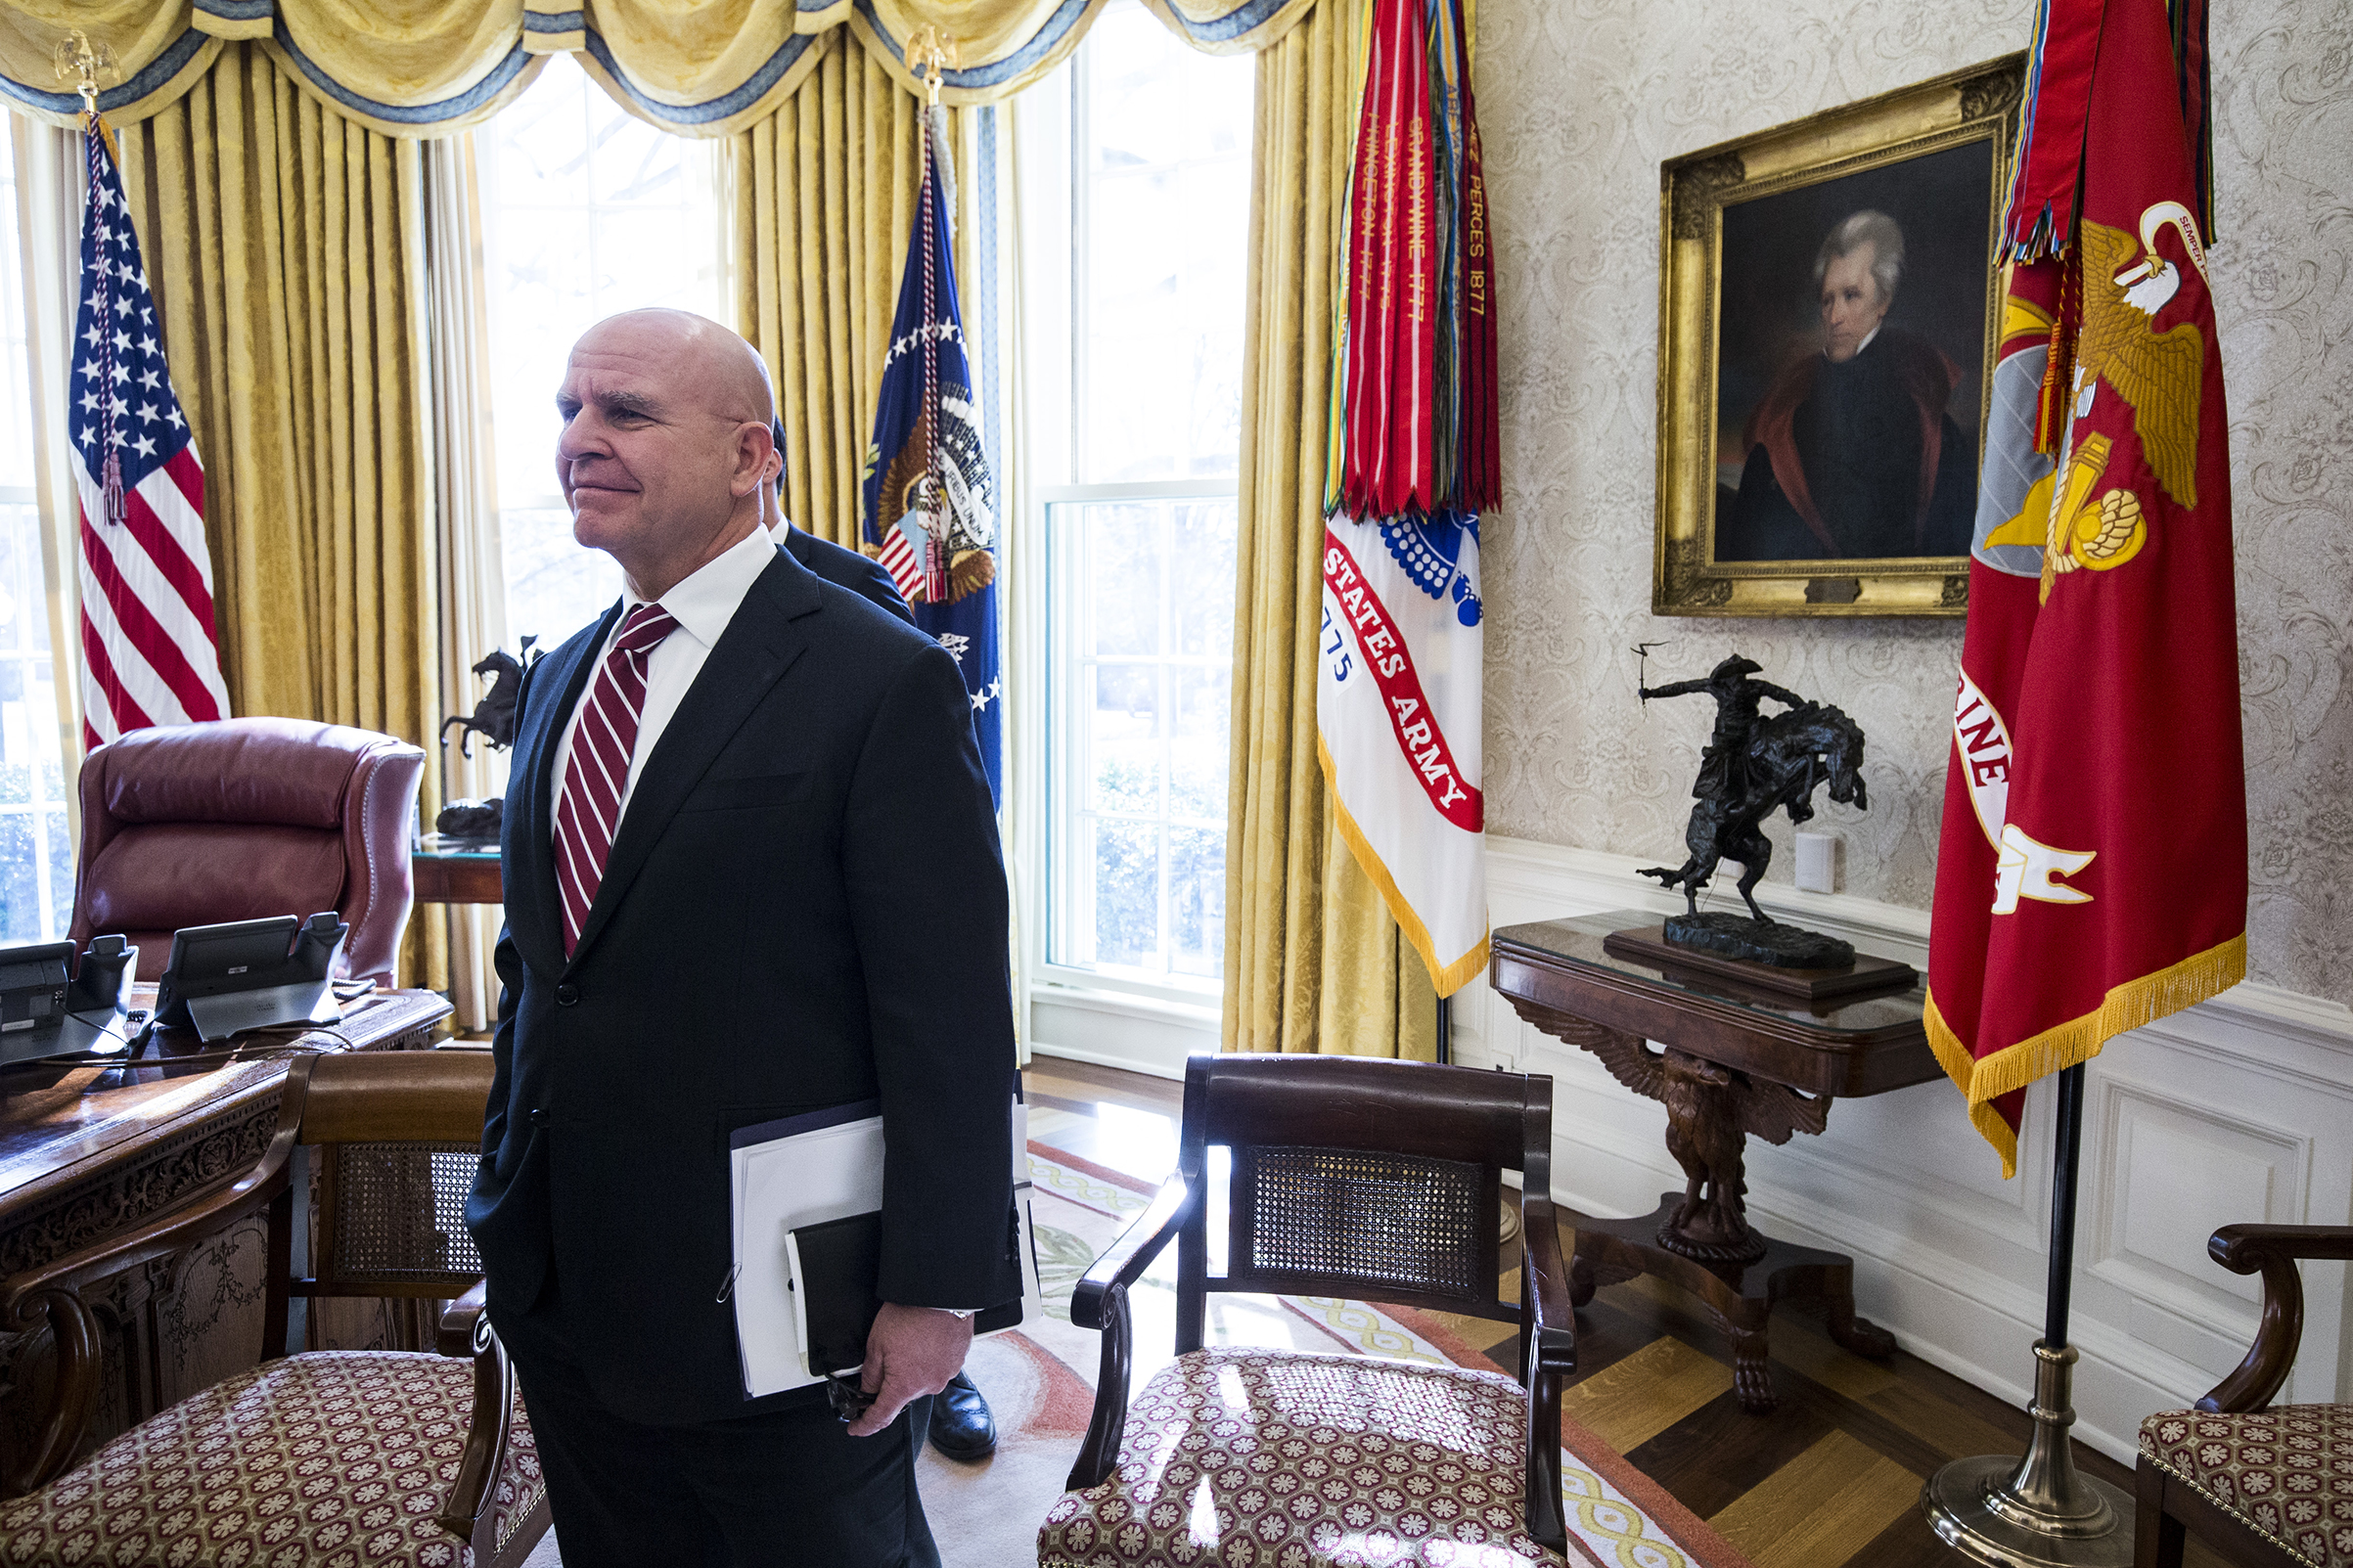 H.R. McMaster, national security advisor, listens as U.S. President Donald Trump, not pictured, speaks during a meeting with North Korean defectors in the Oval Office of the White House in Washington, Feb. 2, 2018. (Zach Gibson—Bloomberg/Getty Images)